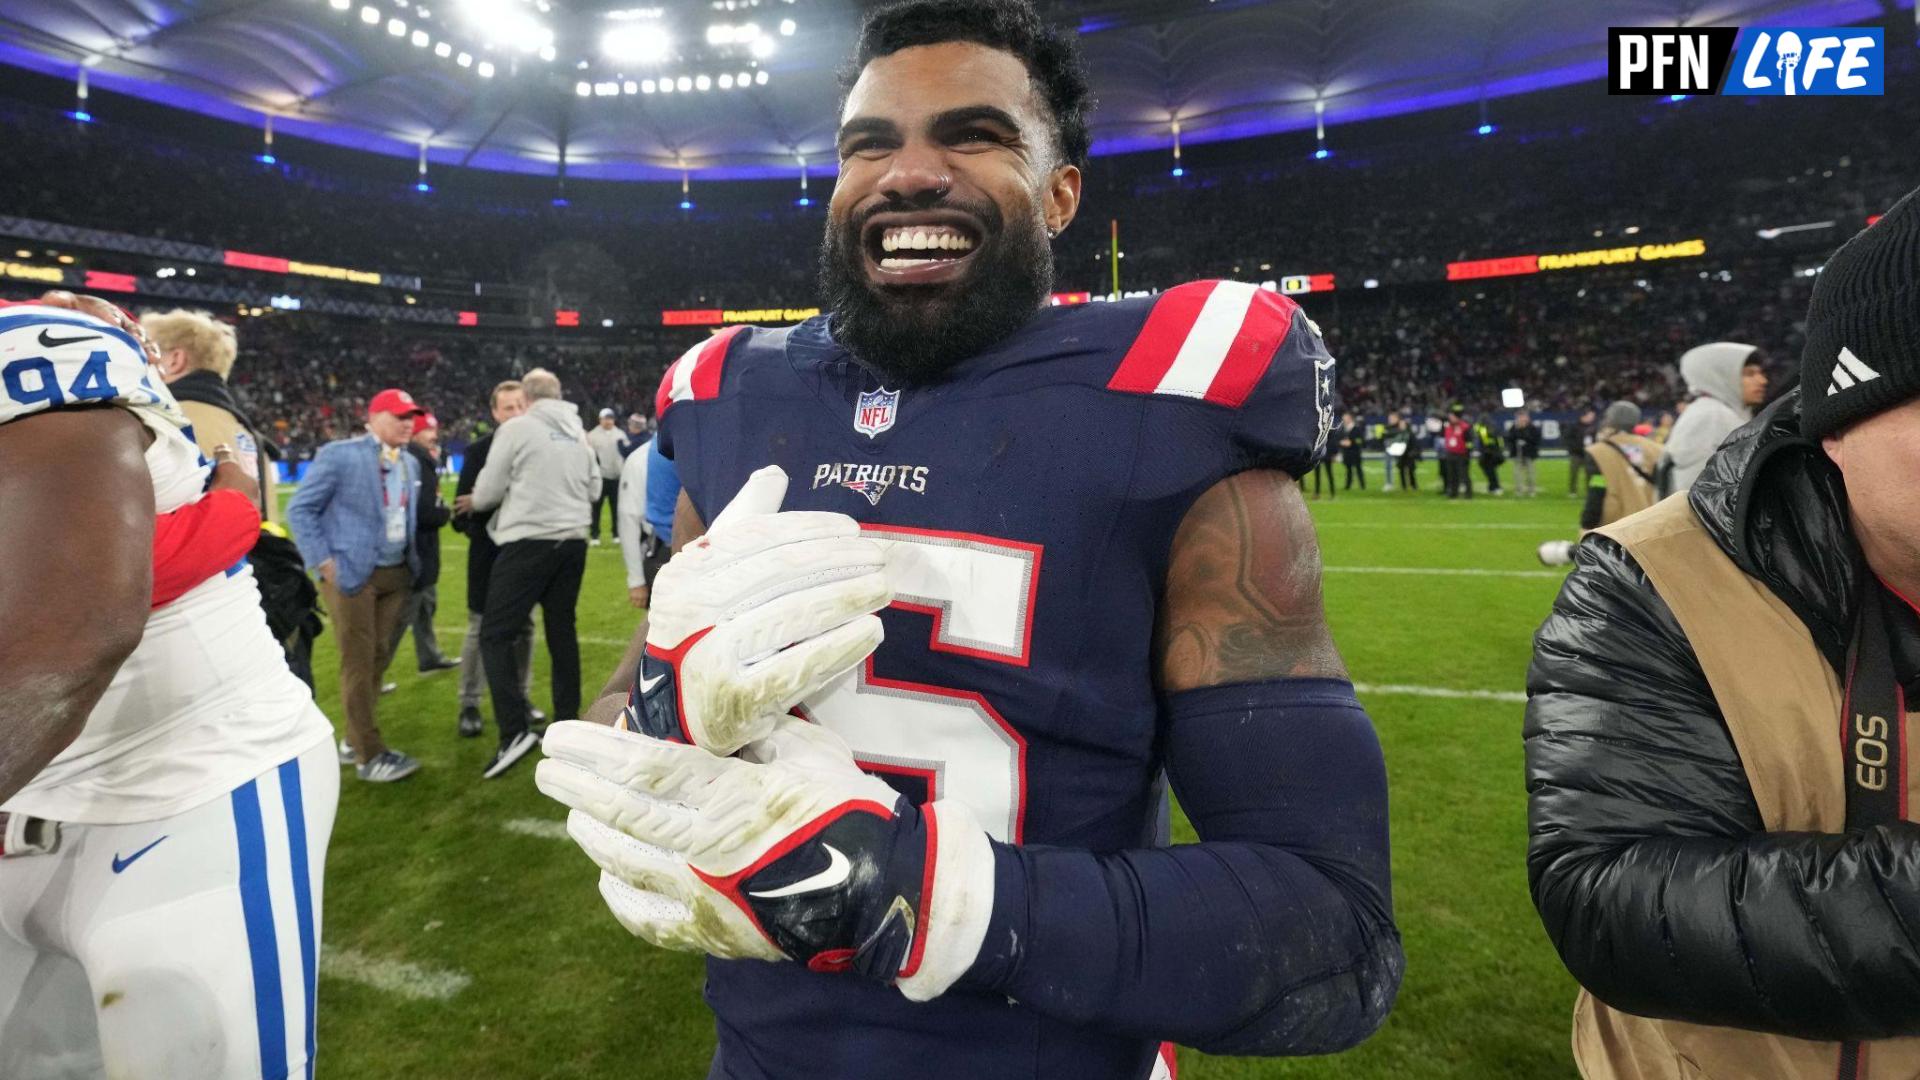 New England Patriots RB Ezekiel Elliott (15) smiling after a game against the Indianapolis Colts.